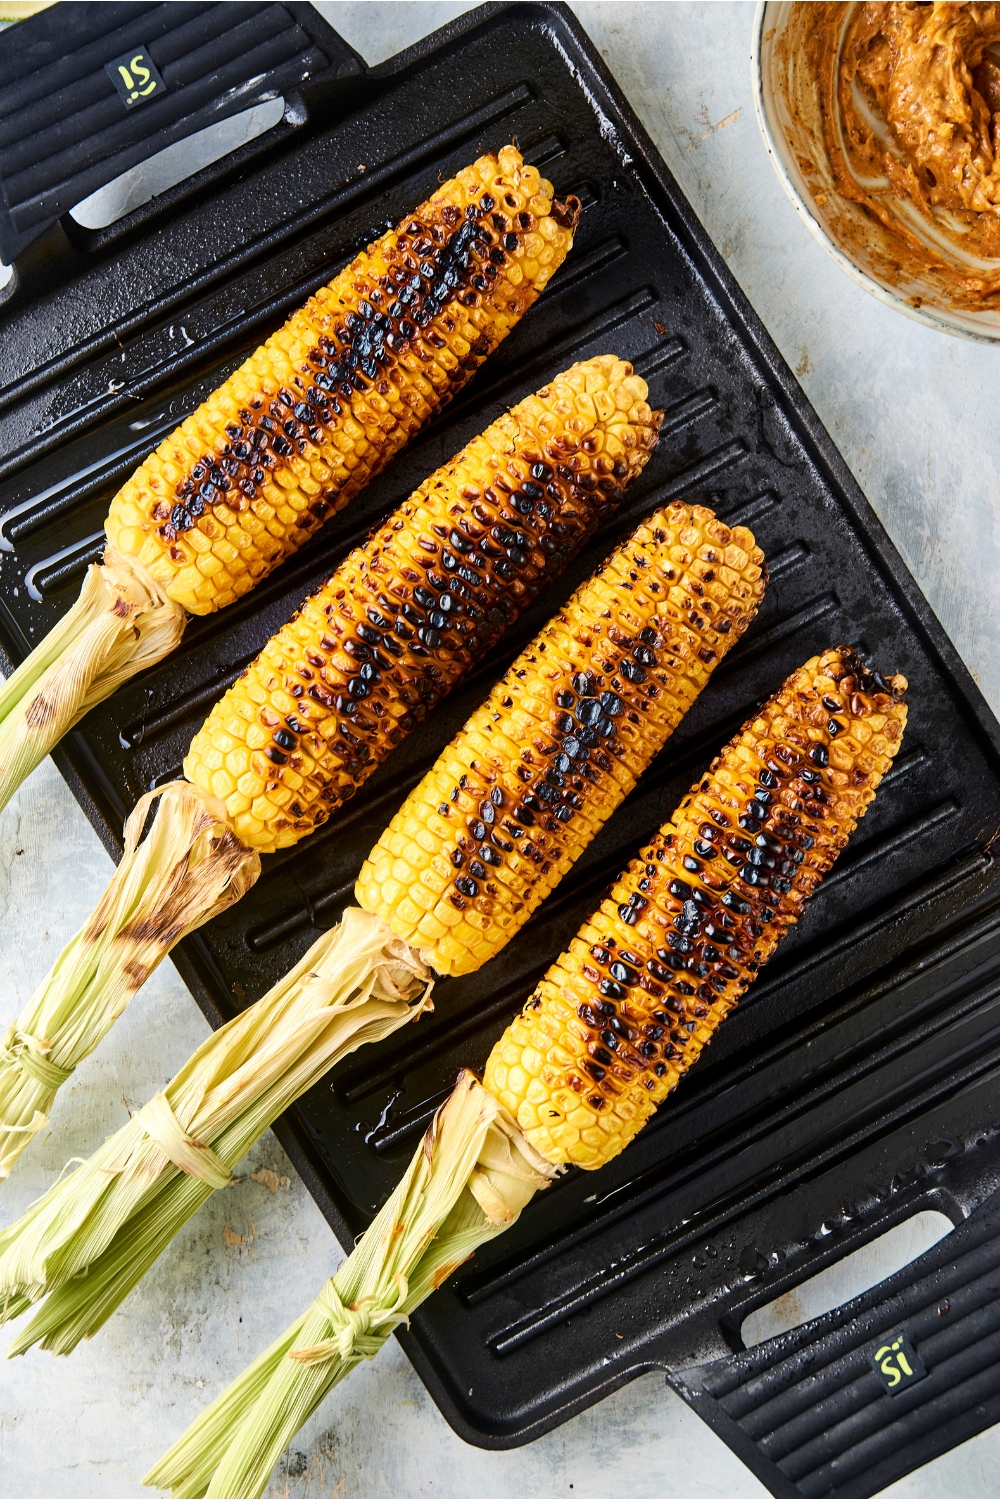 Four ears of corn are on a grill pan. The corn has been charred on each side.